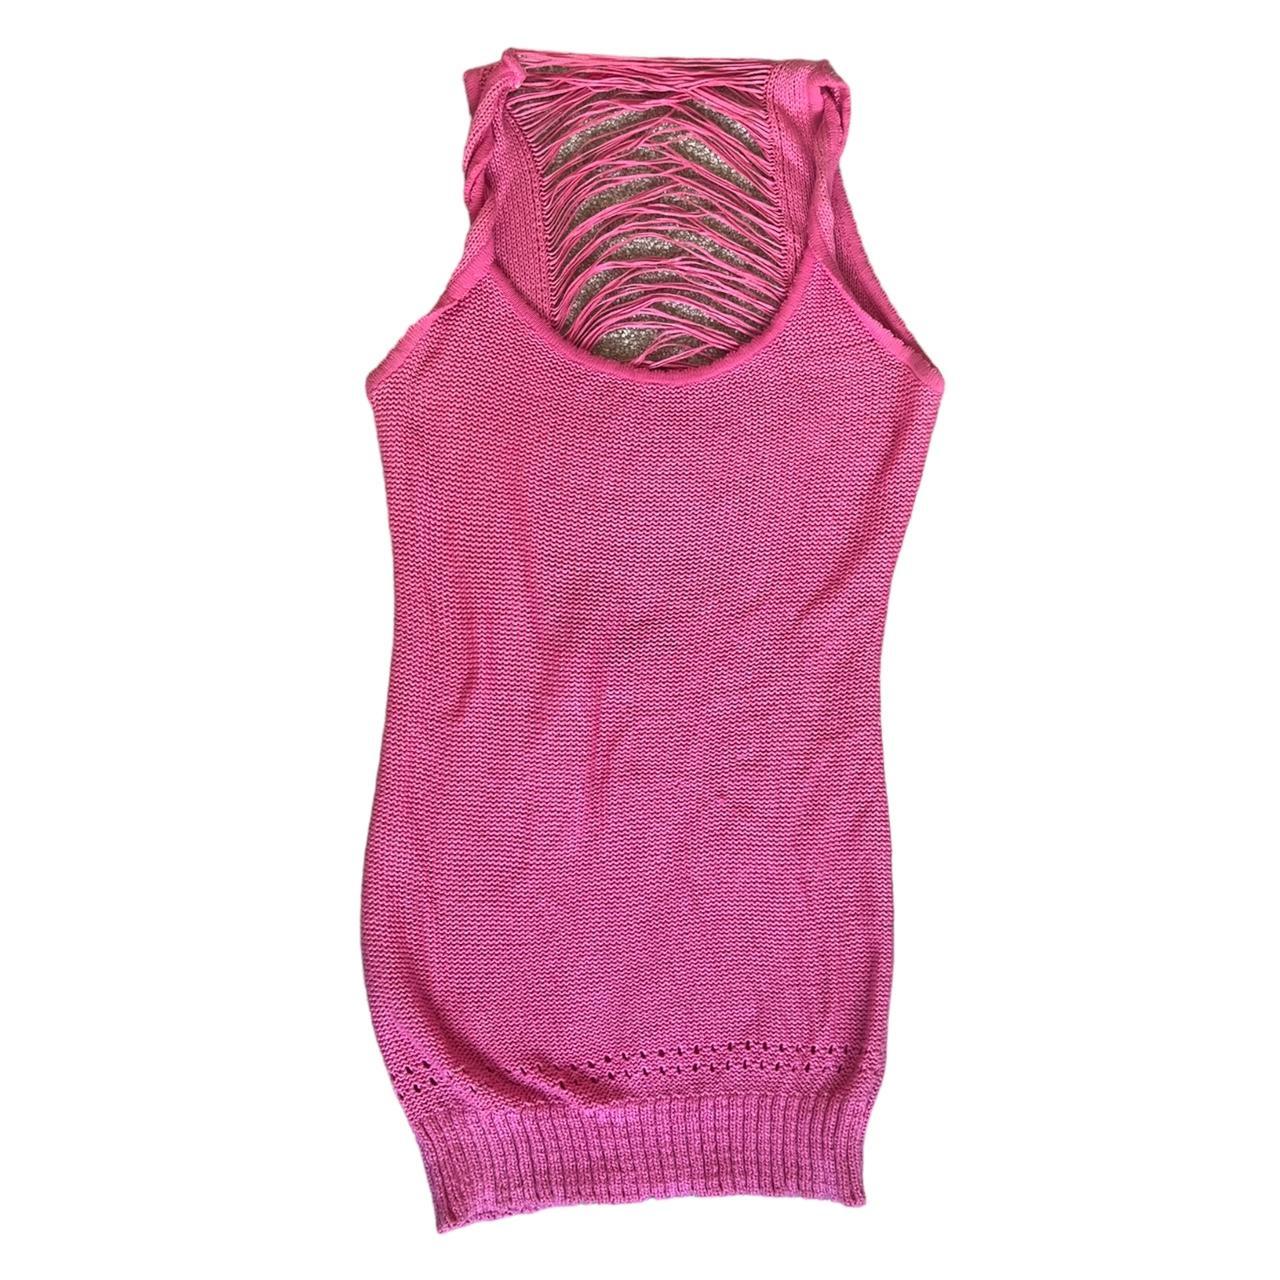 Pink Jane Norman knitted ultra mini dress. Great for... - Depop